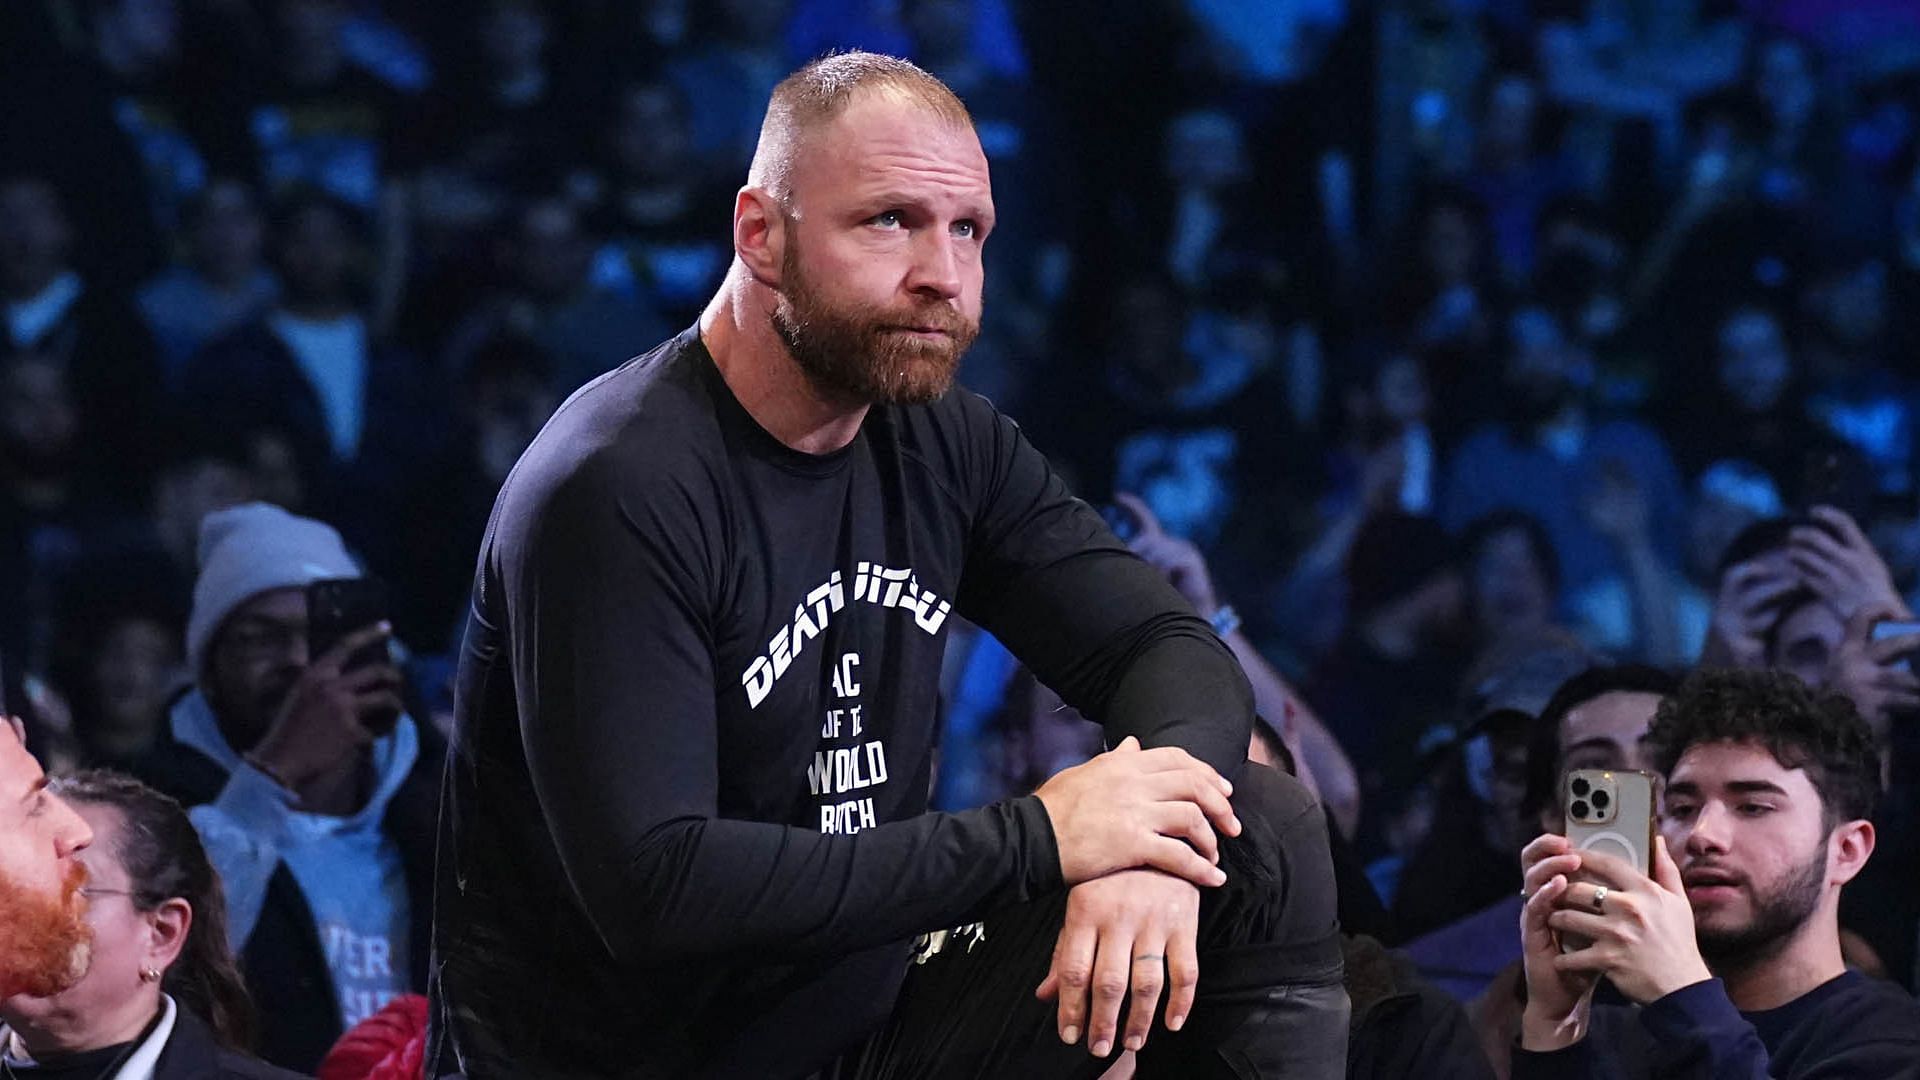 Moxley has been absent from AEW TV for a few weeks (image credit: All Elite Wrestling)